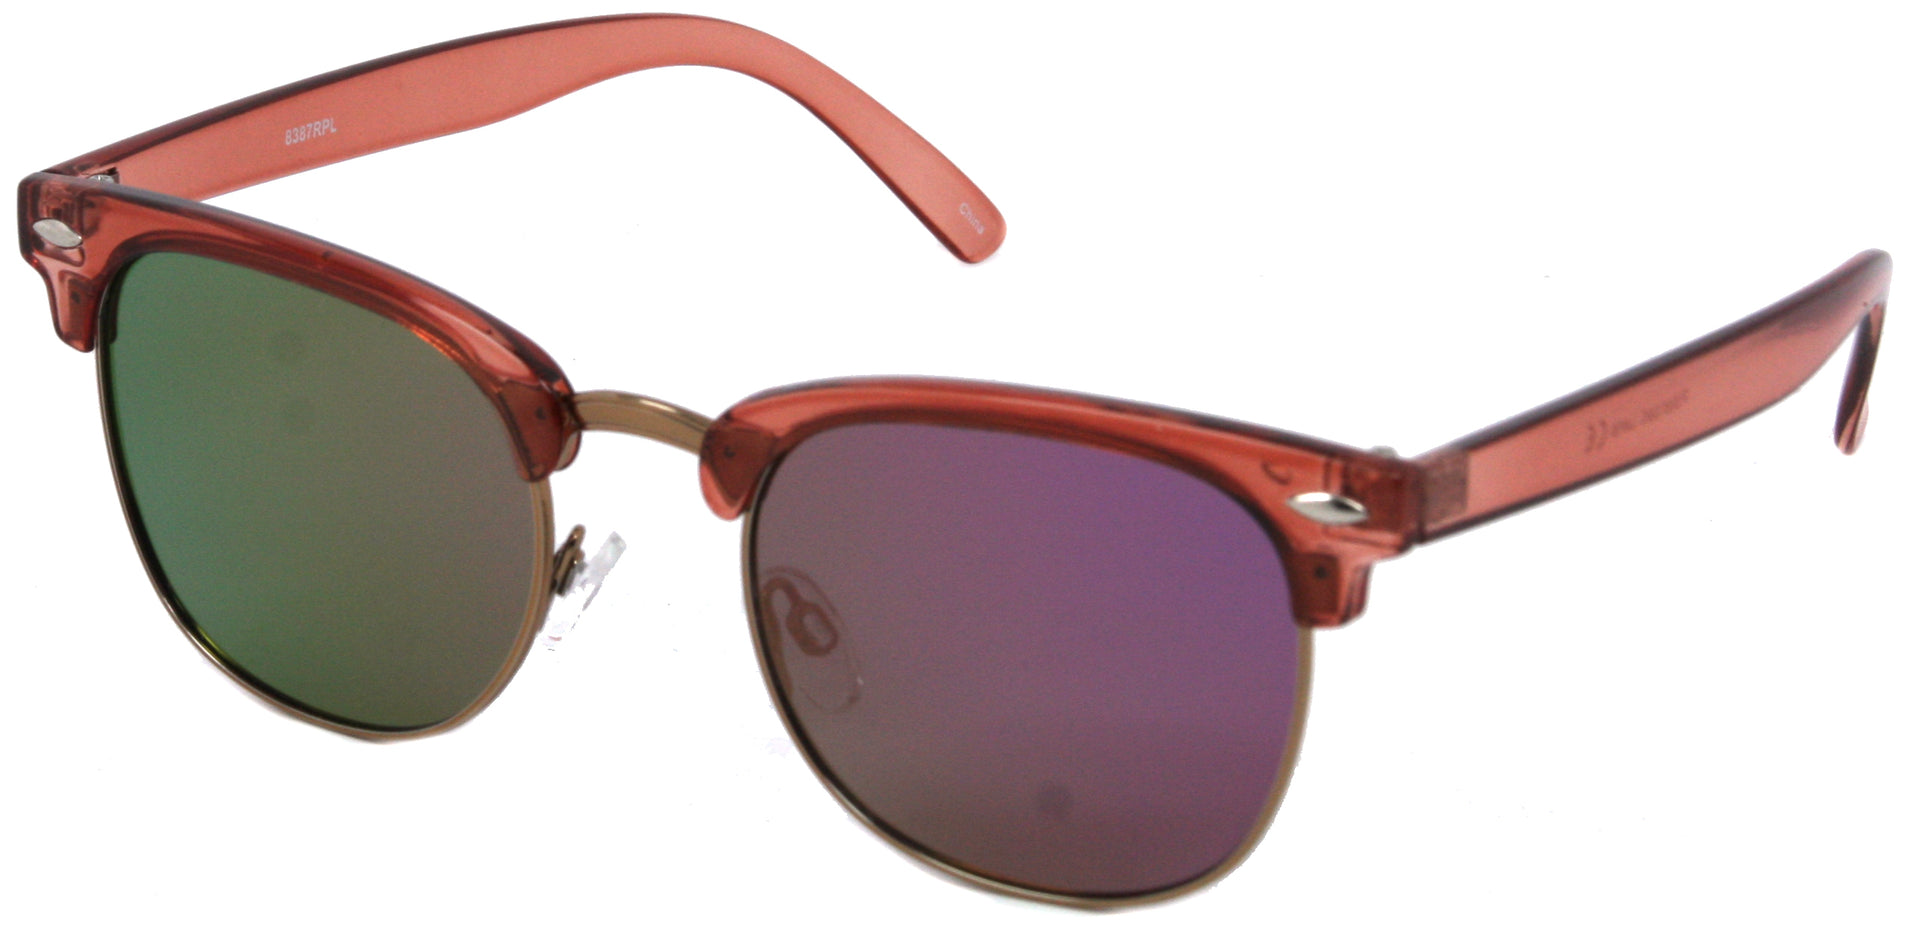 8387RPL - Wholesale Classic Style Polarized Colored Mirror Sunglasses in Rose Pink